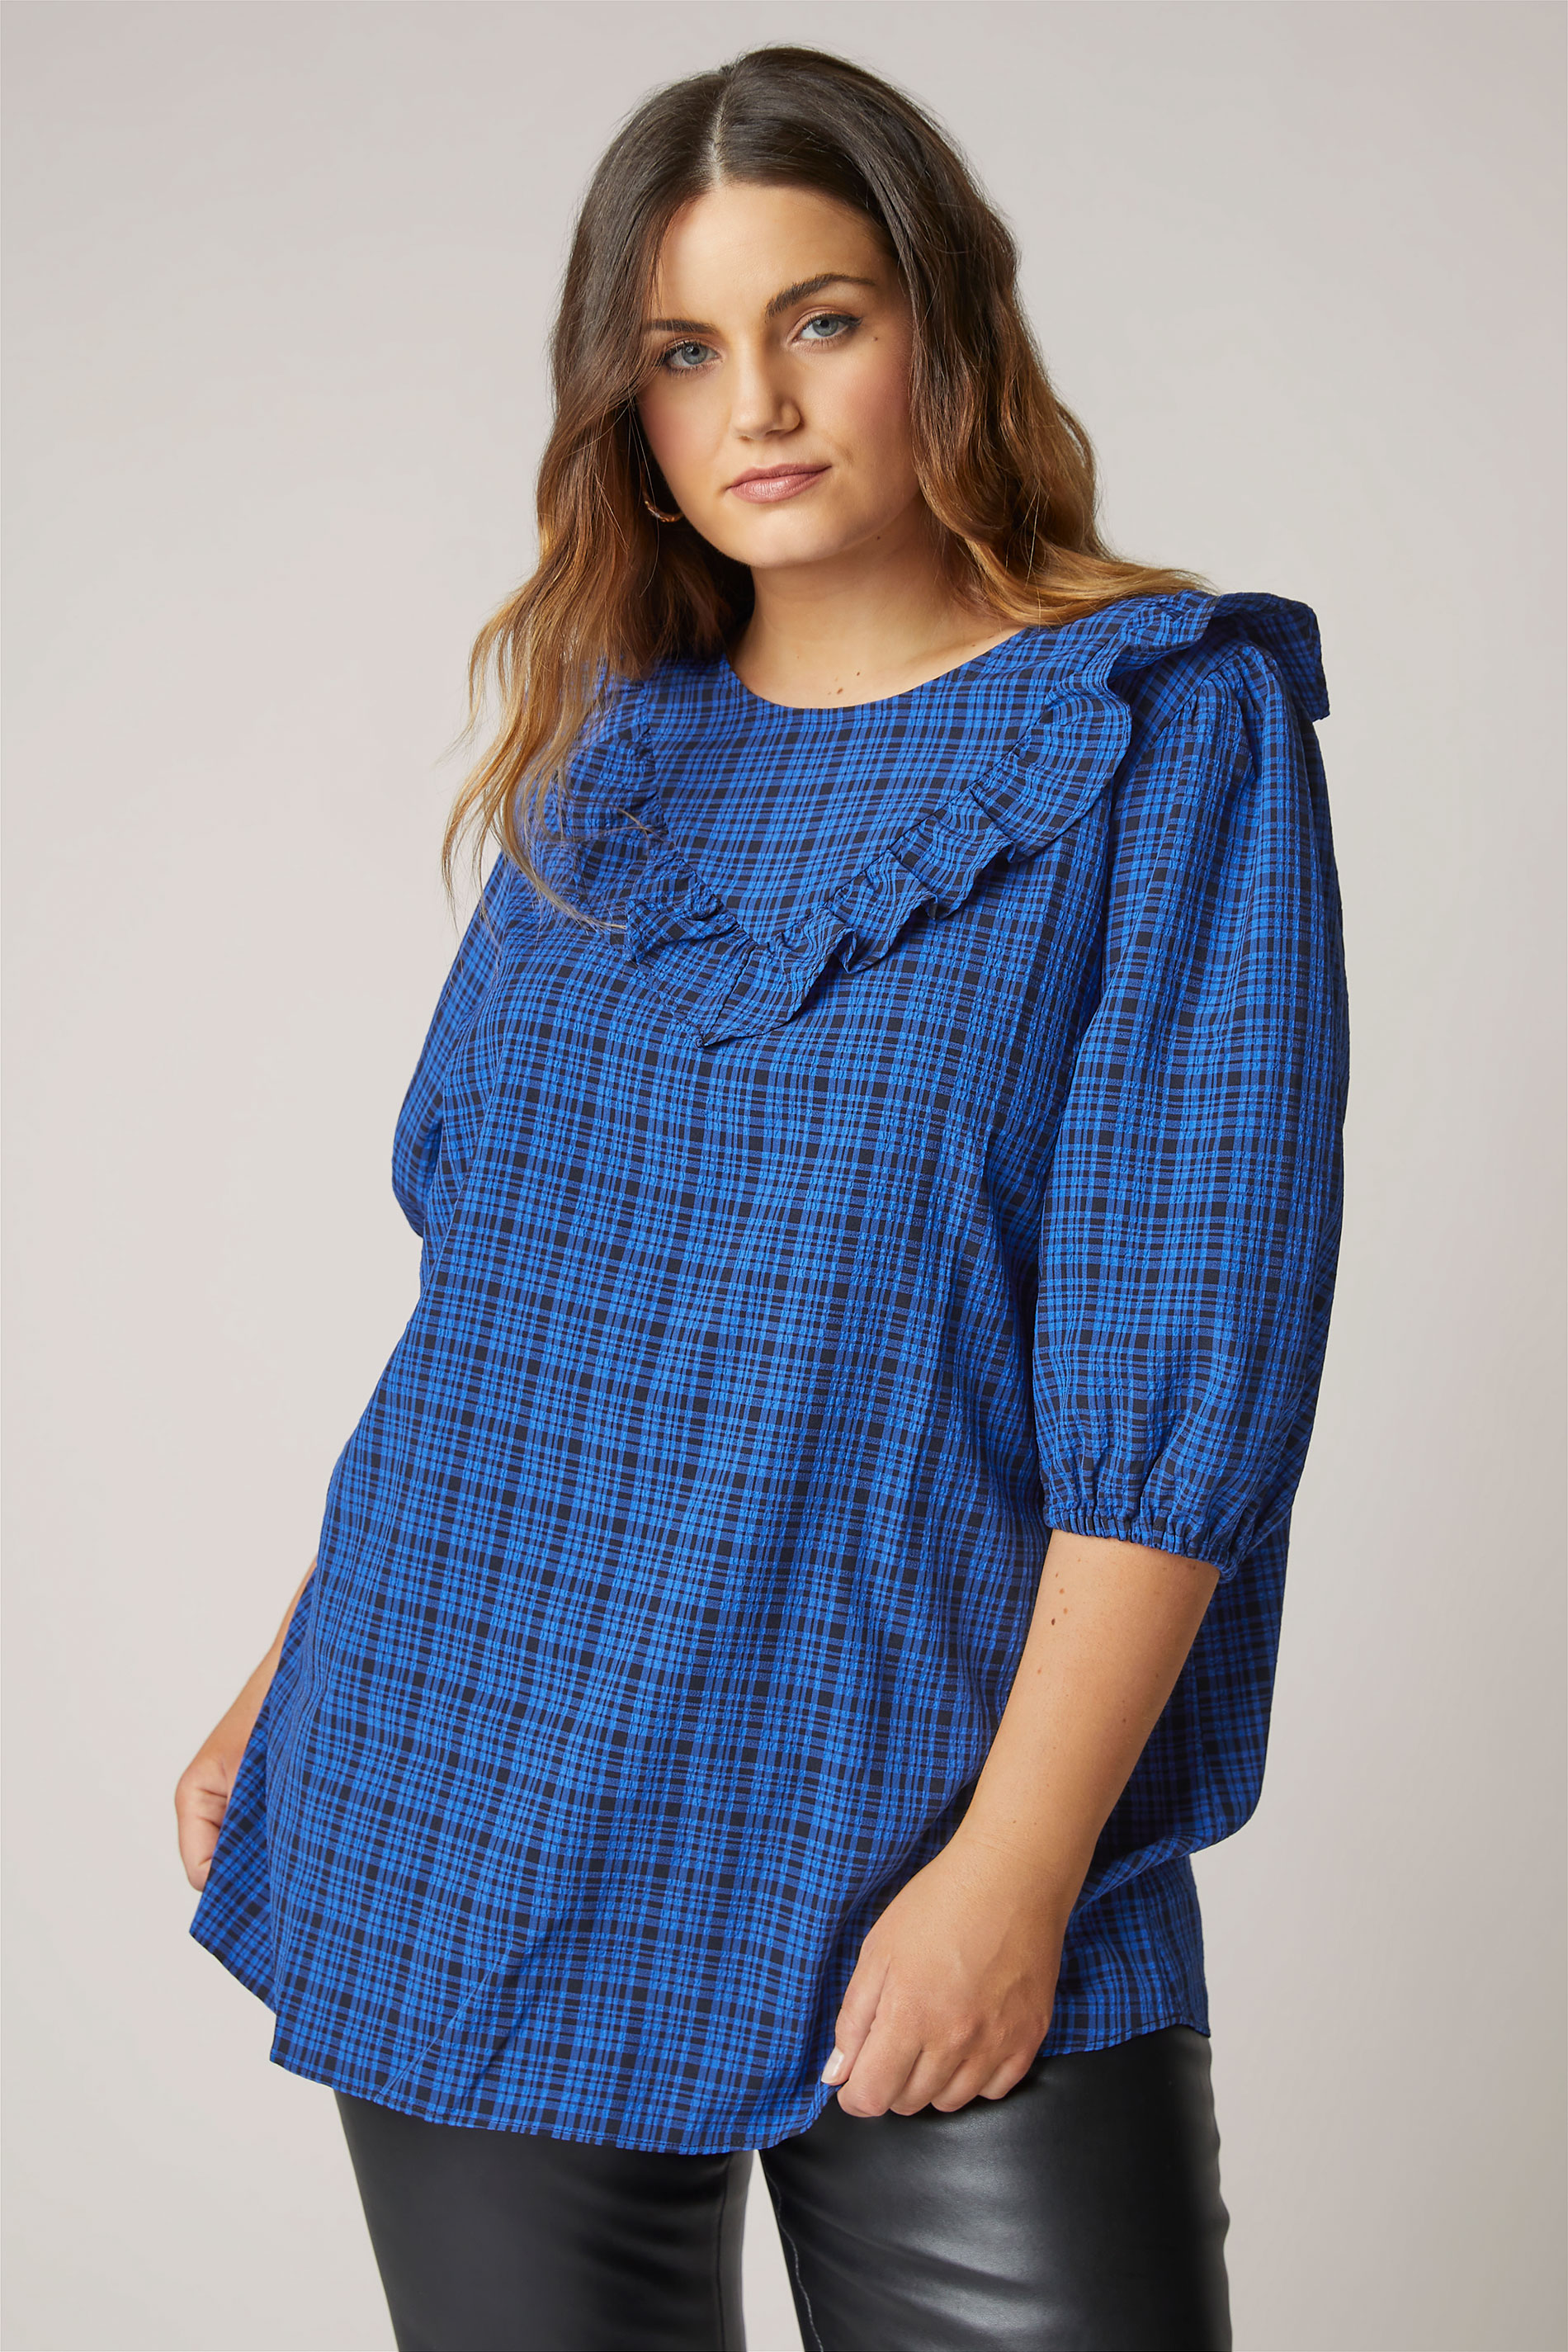 THE LIMITED EDIT Blue Chevron Frill Check Top_A.jpg